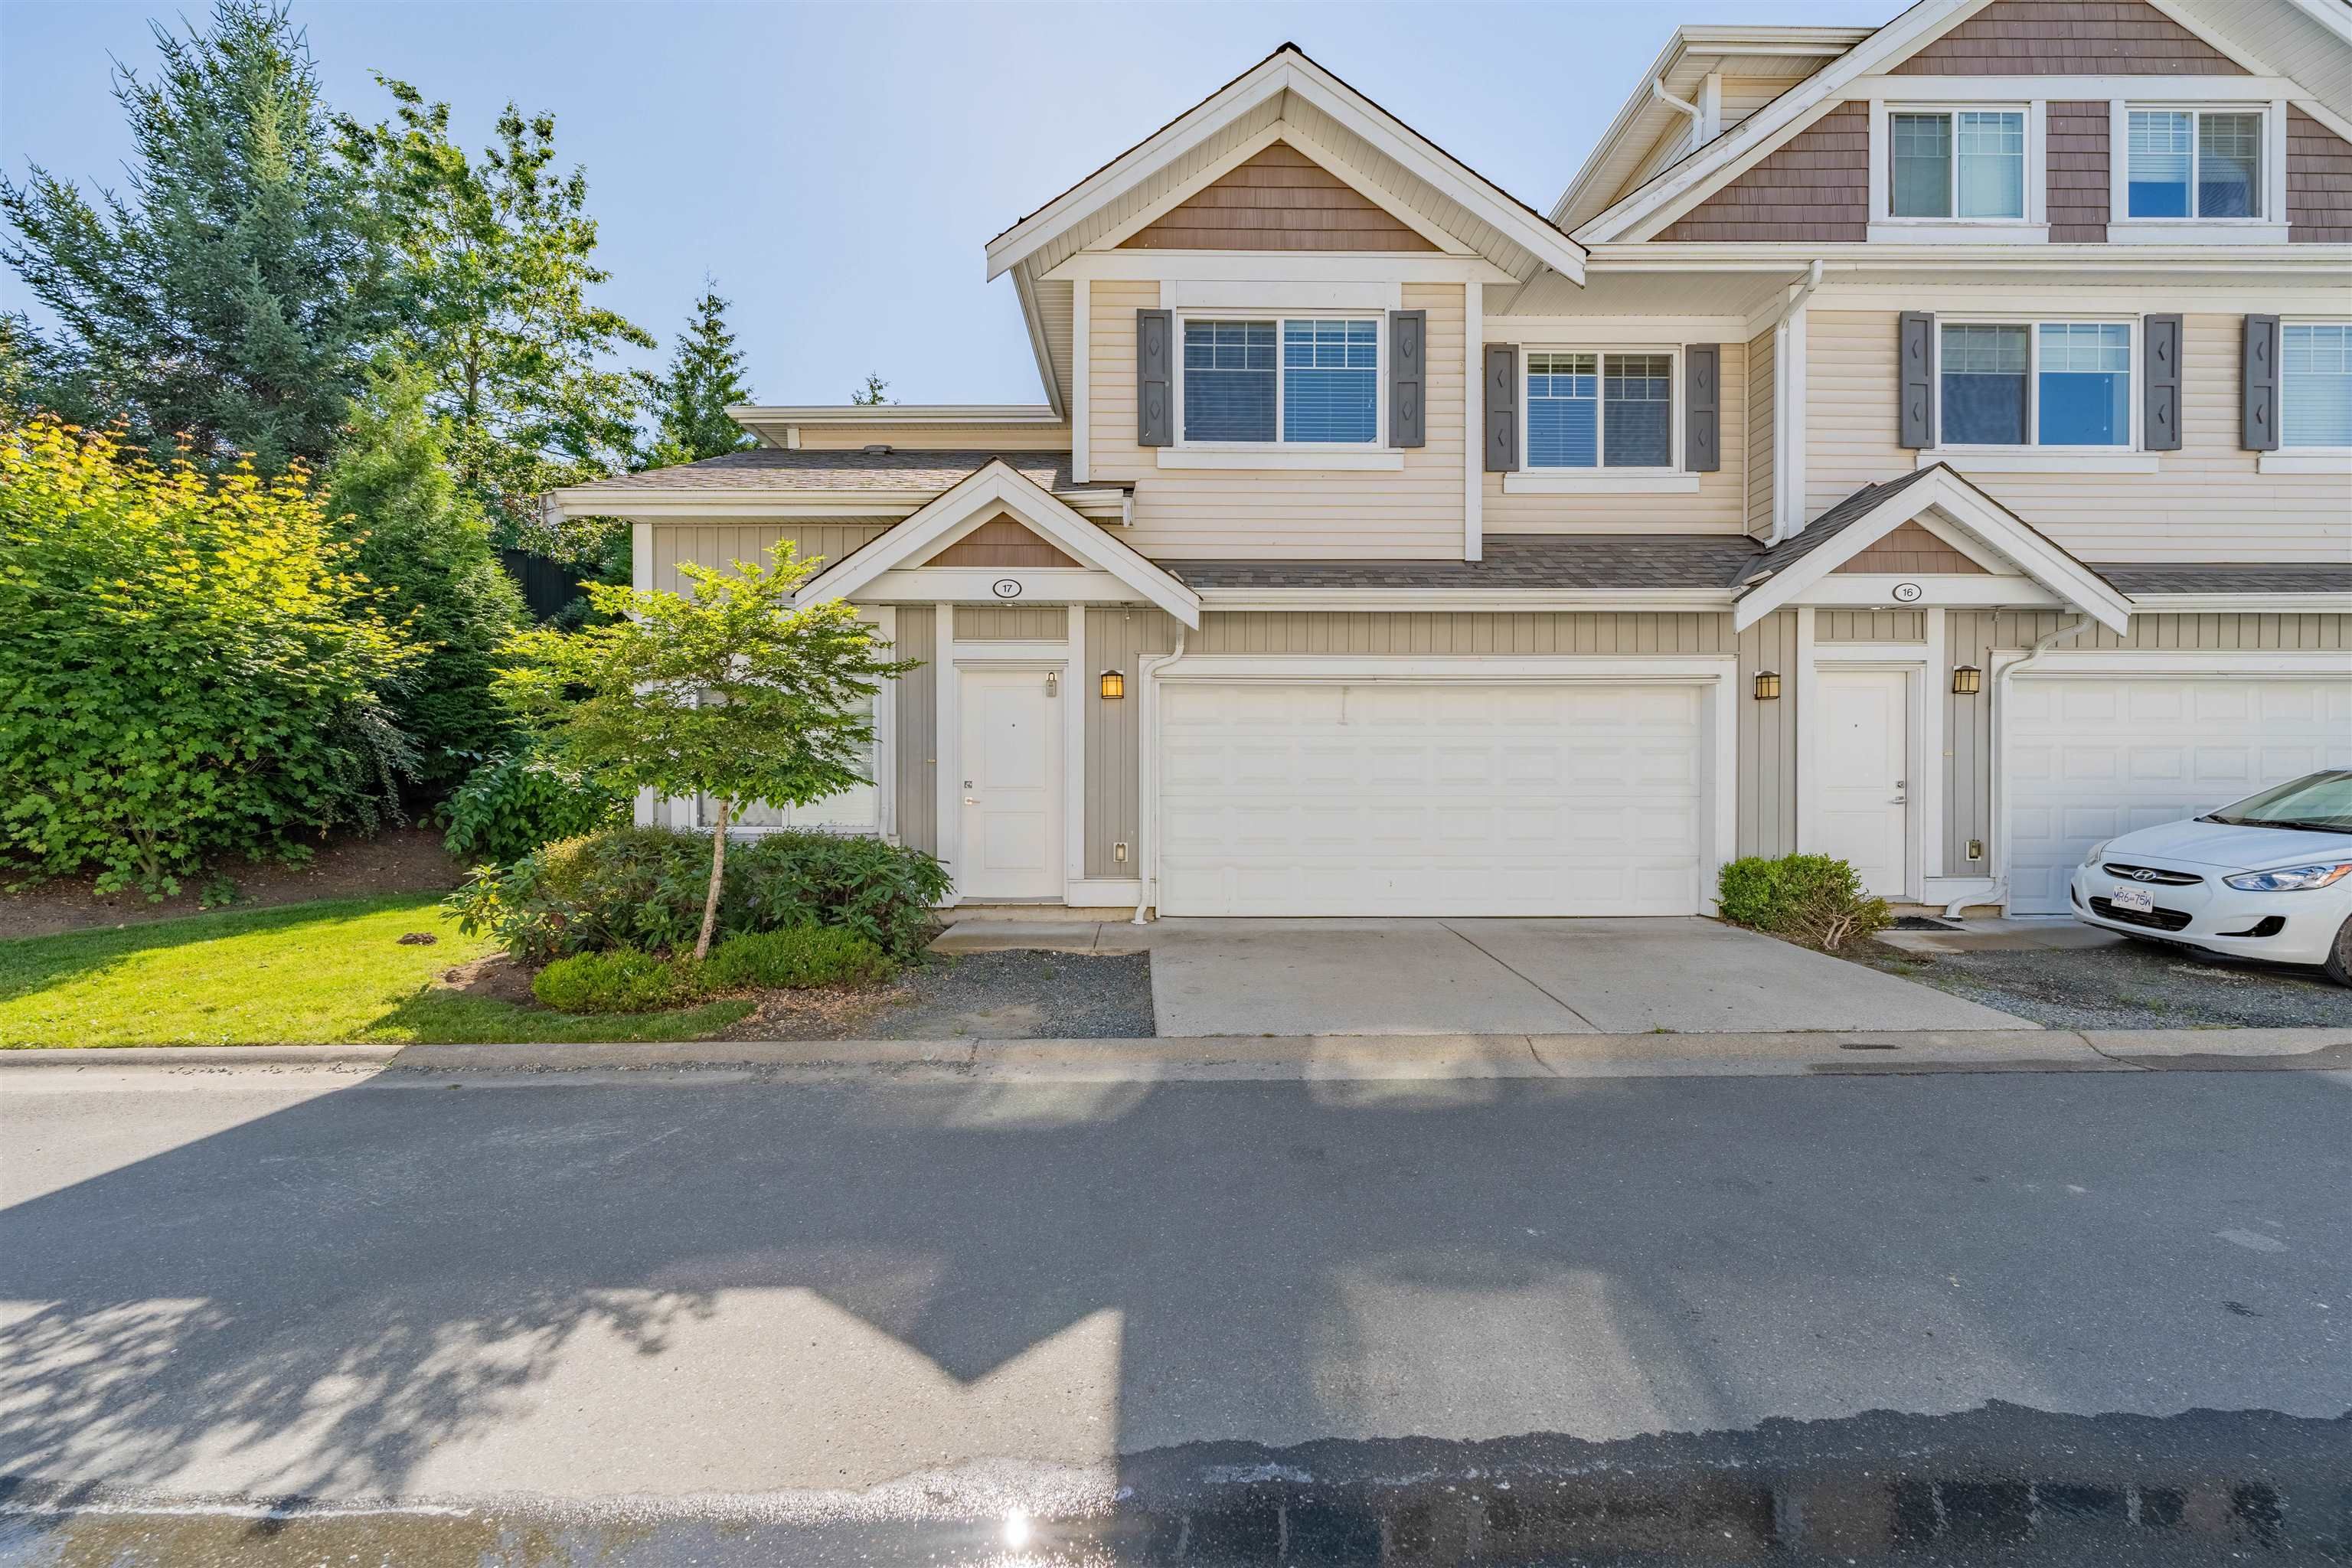 Open House. Open House on Sunday, July 24, 2022 2:00PM - 4:00PM